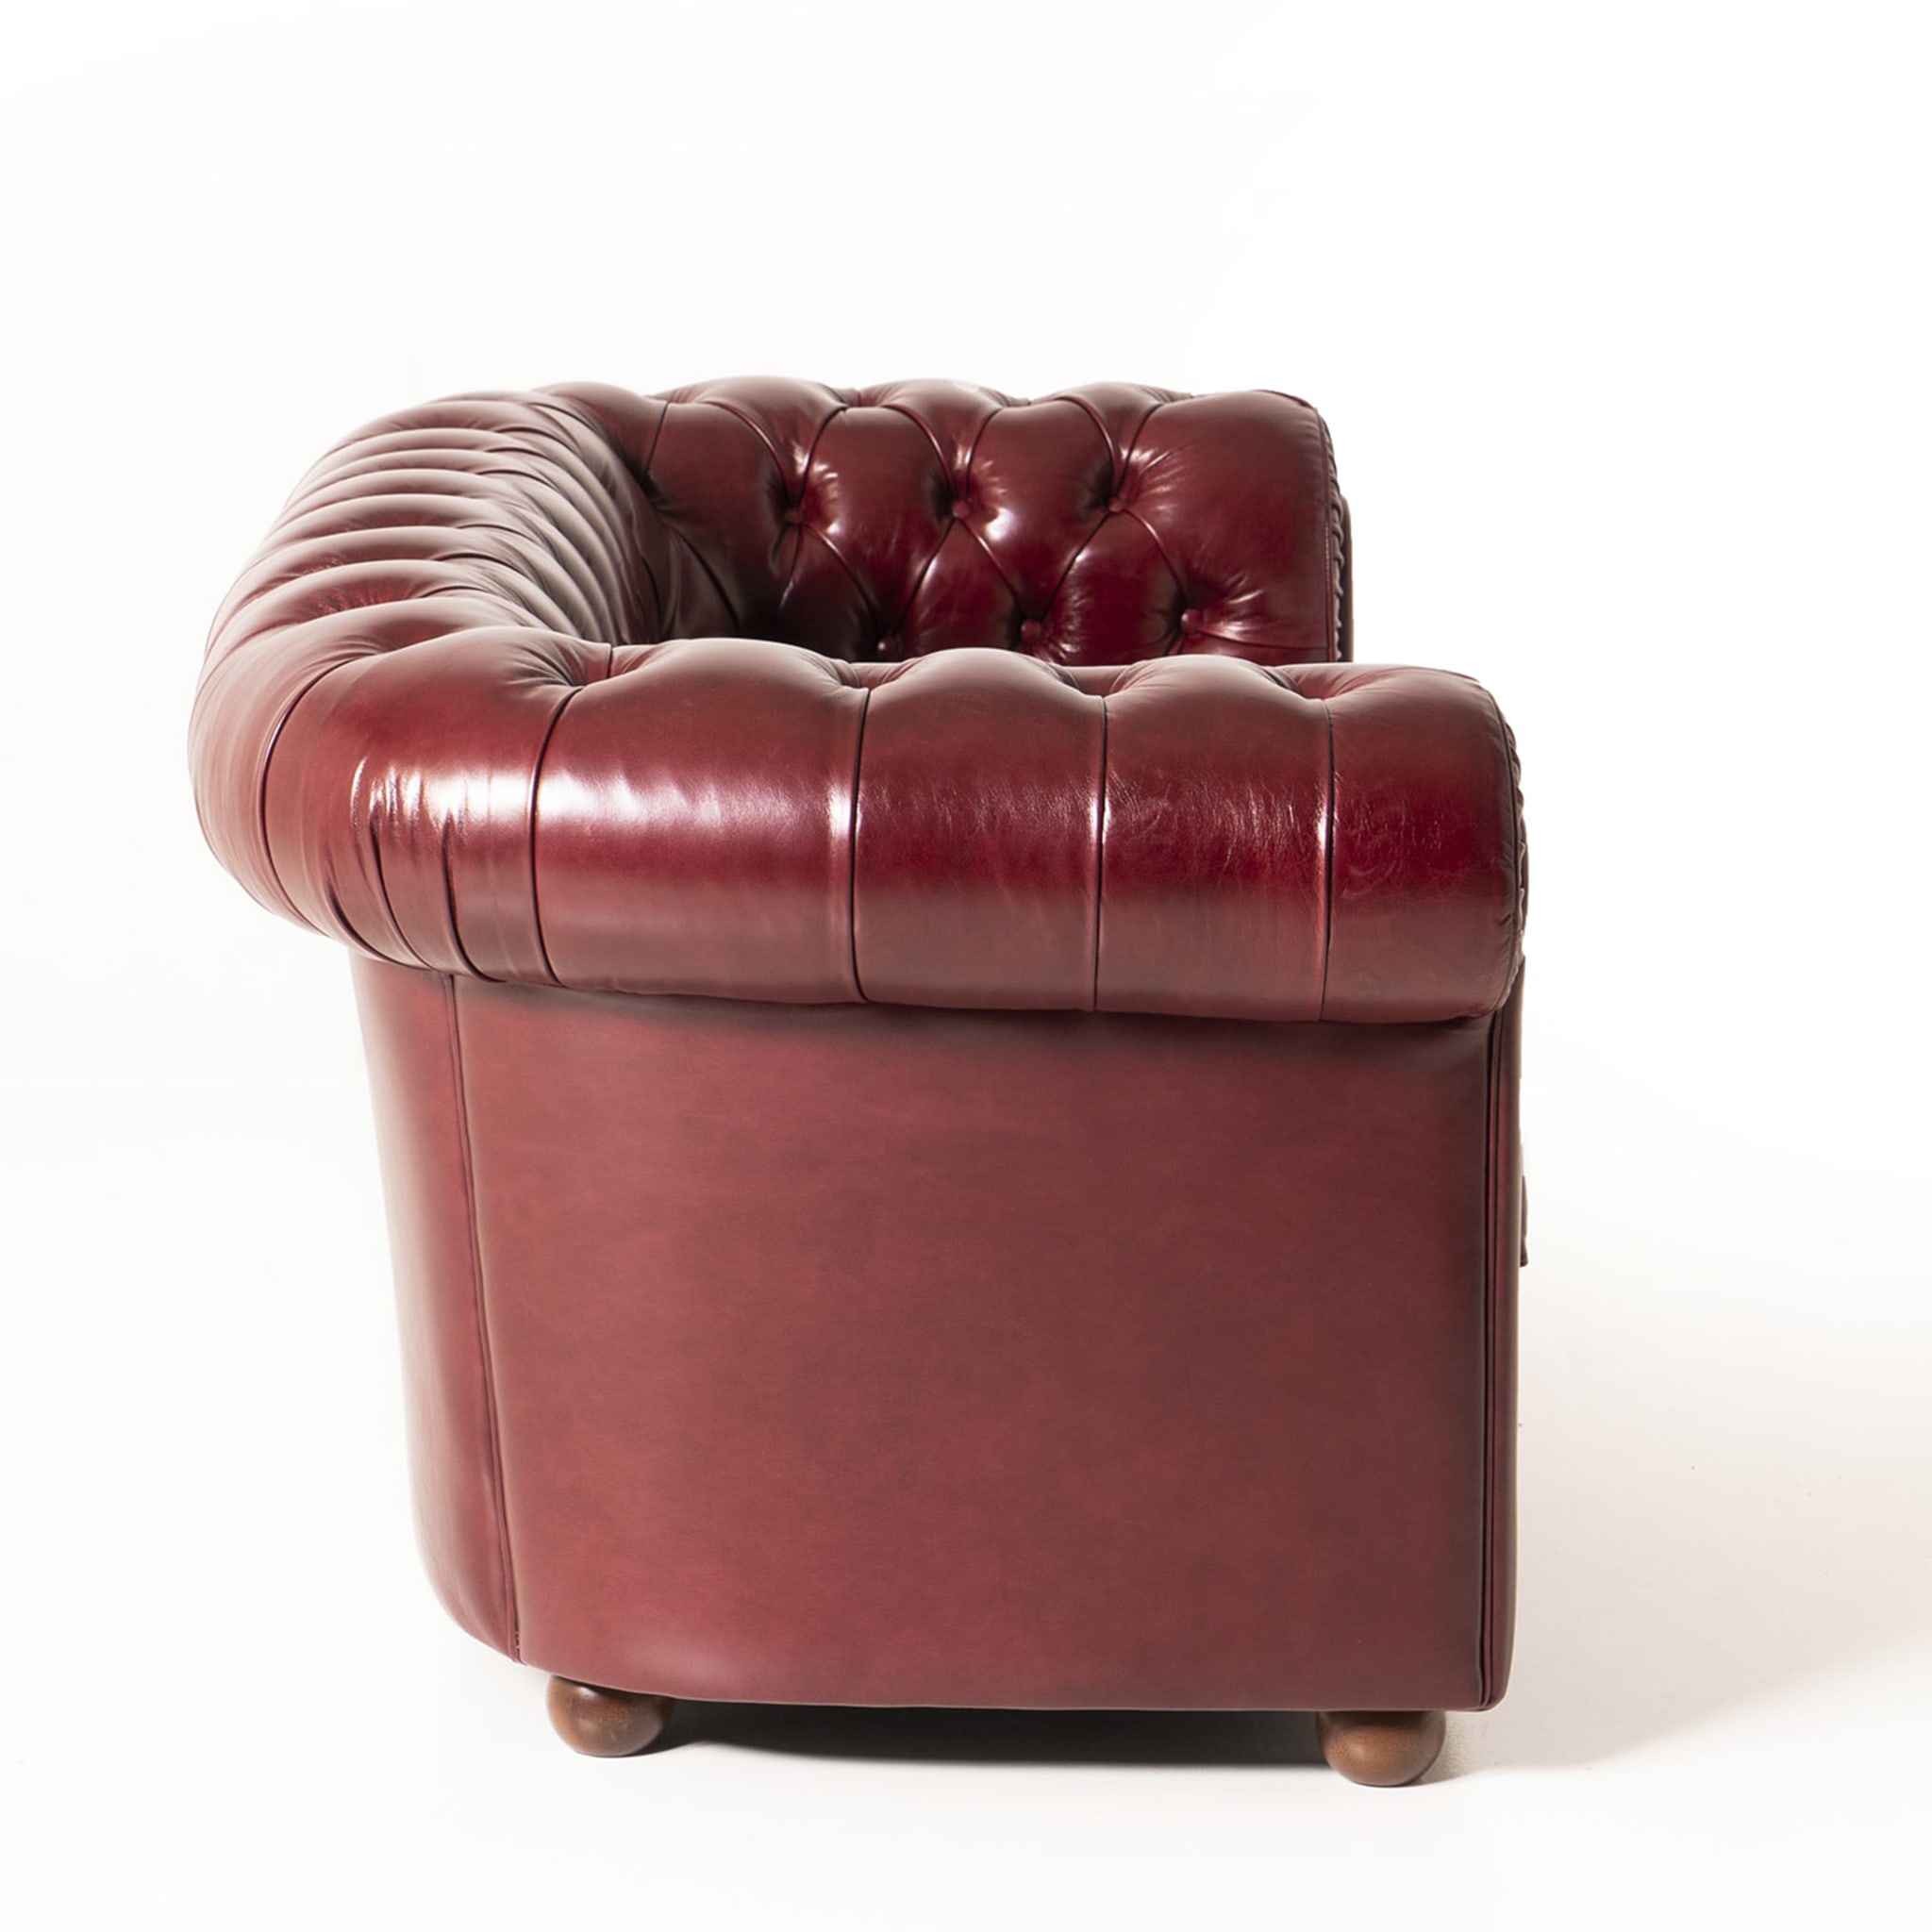 Chesterfield Bordeaux Leather Sofa - Alternative view 5